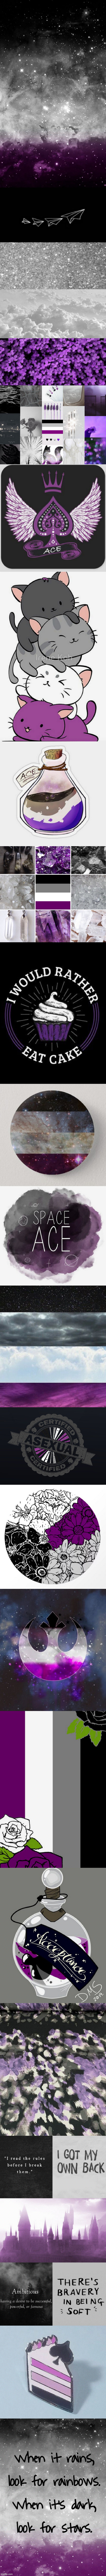 ace aesthetic stuff | image tagged in hi | made w/ Imgflip meme maker